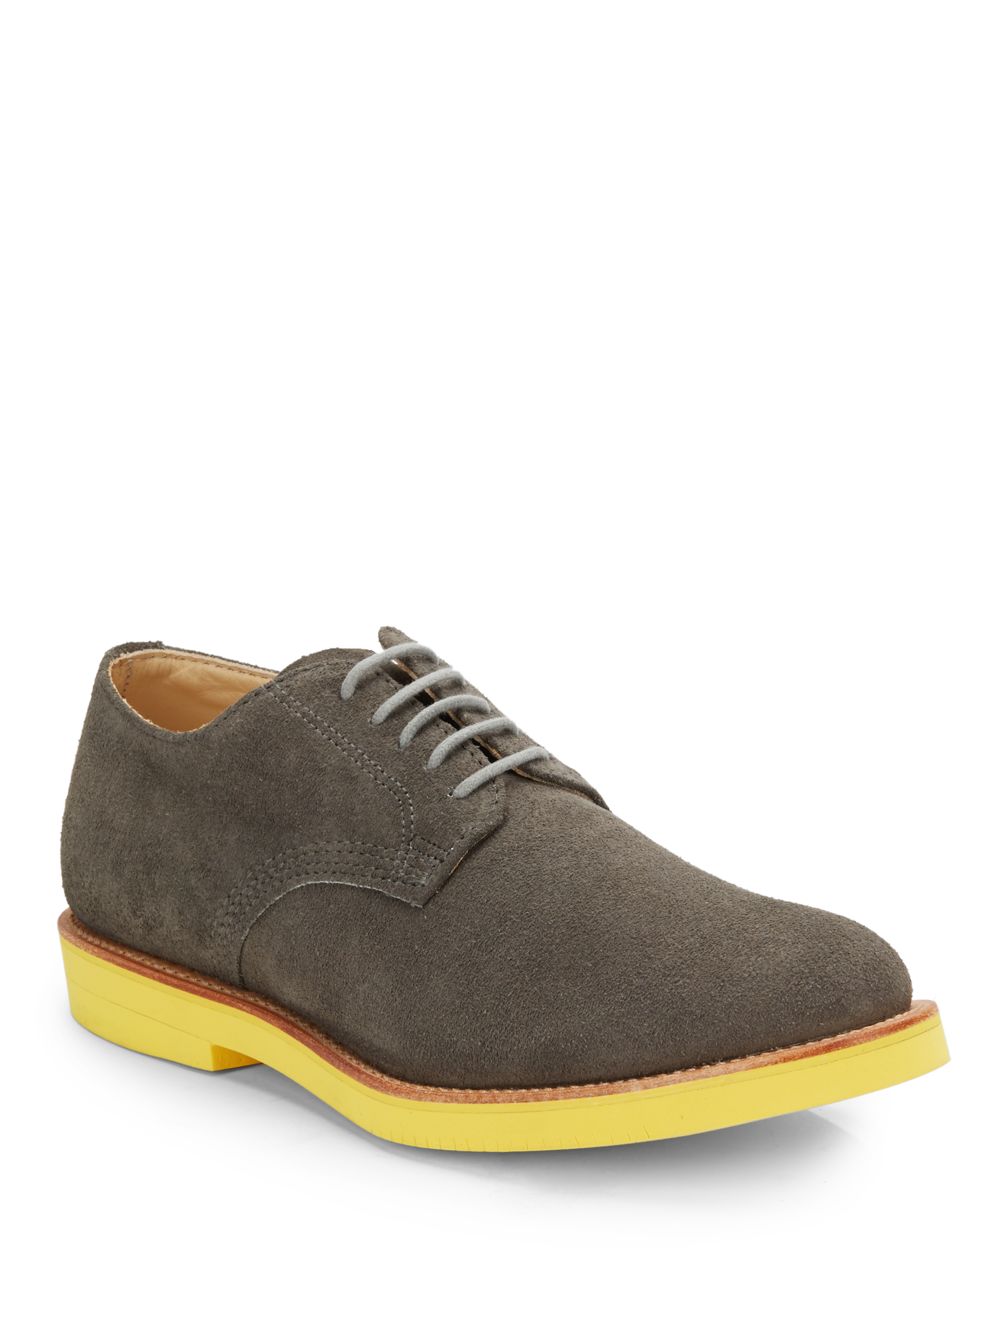 Lyst - Walk-Over Suede Contrast Sole Derby Shoes in Gray for Men